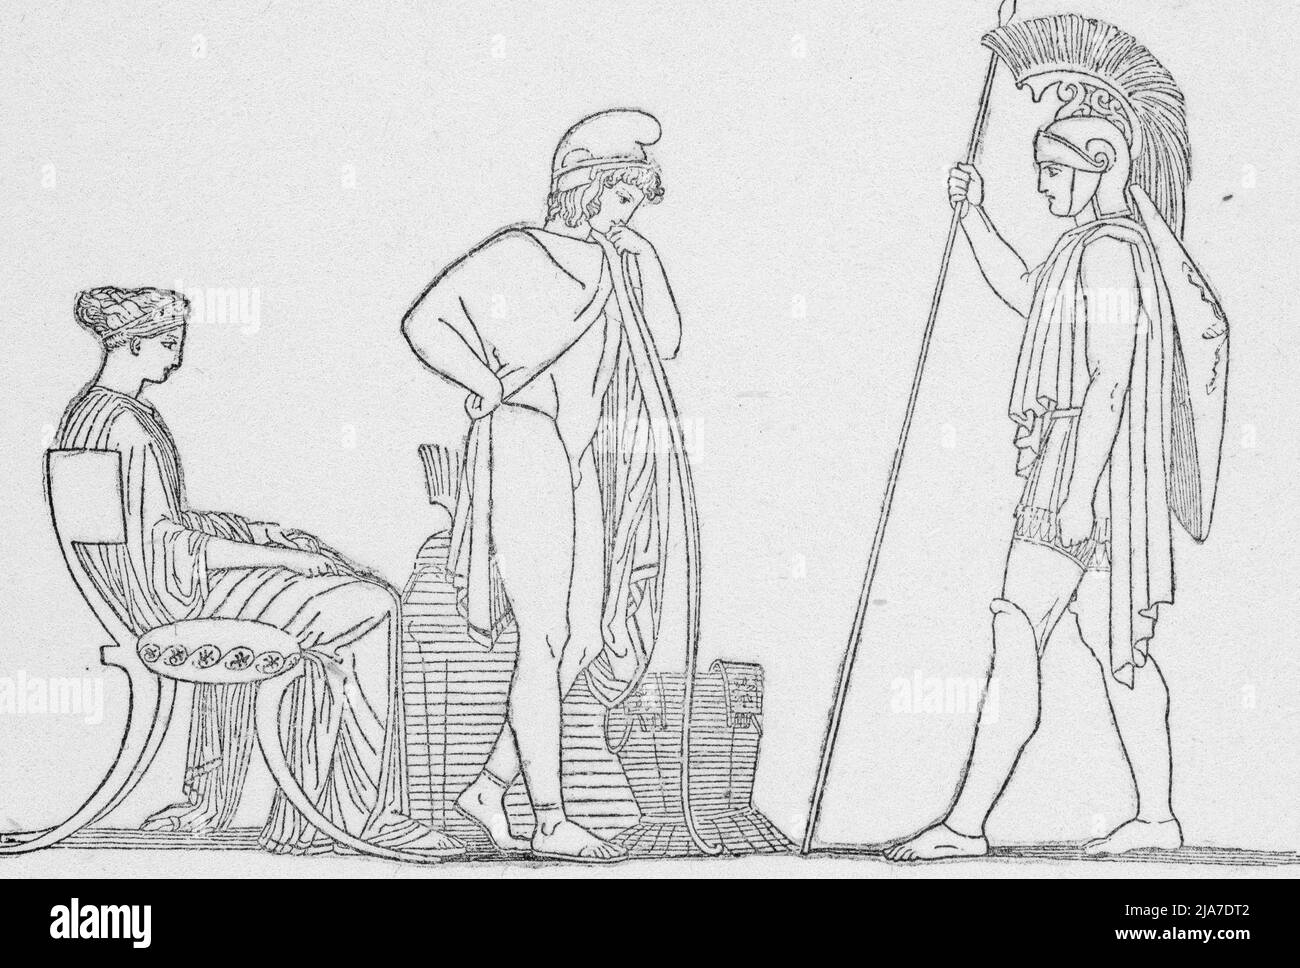 Hector Chiding Paris, c1792. By John Flaxman (1755-1826). In the tenth year of the Trojan War, observing Paris avoiding combat with Menelaus, Hector scolds him with having brought trouble on his whole country and now refusing to fight. An illustration from the Iliad. The Iliad is an ancient Greek epic poem in dactylic hexameter, traditionally attributed to Homer. Stock Photo